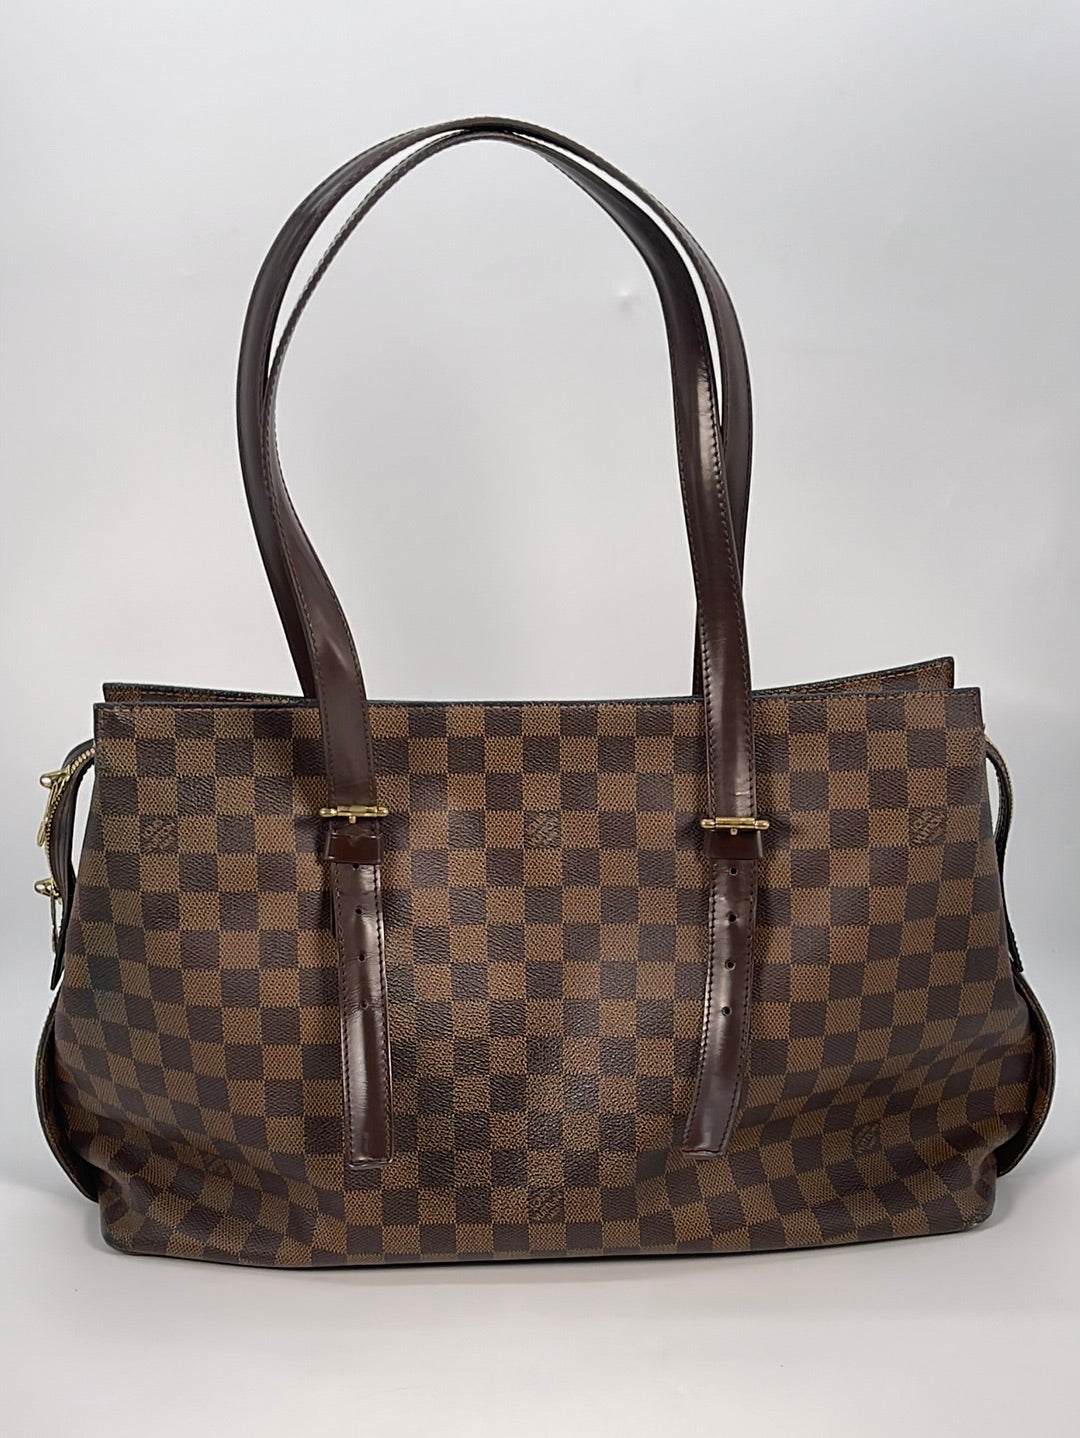 Louis Vuitton Damier Ebene Chelsea Tote at Jill's Consignment